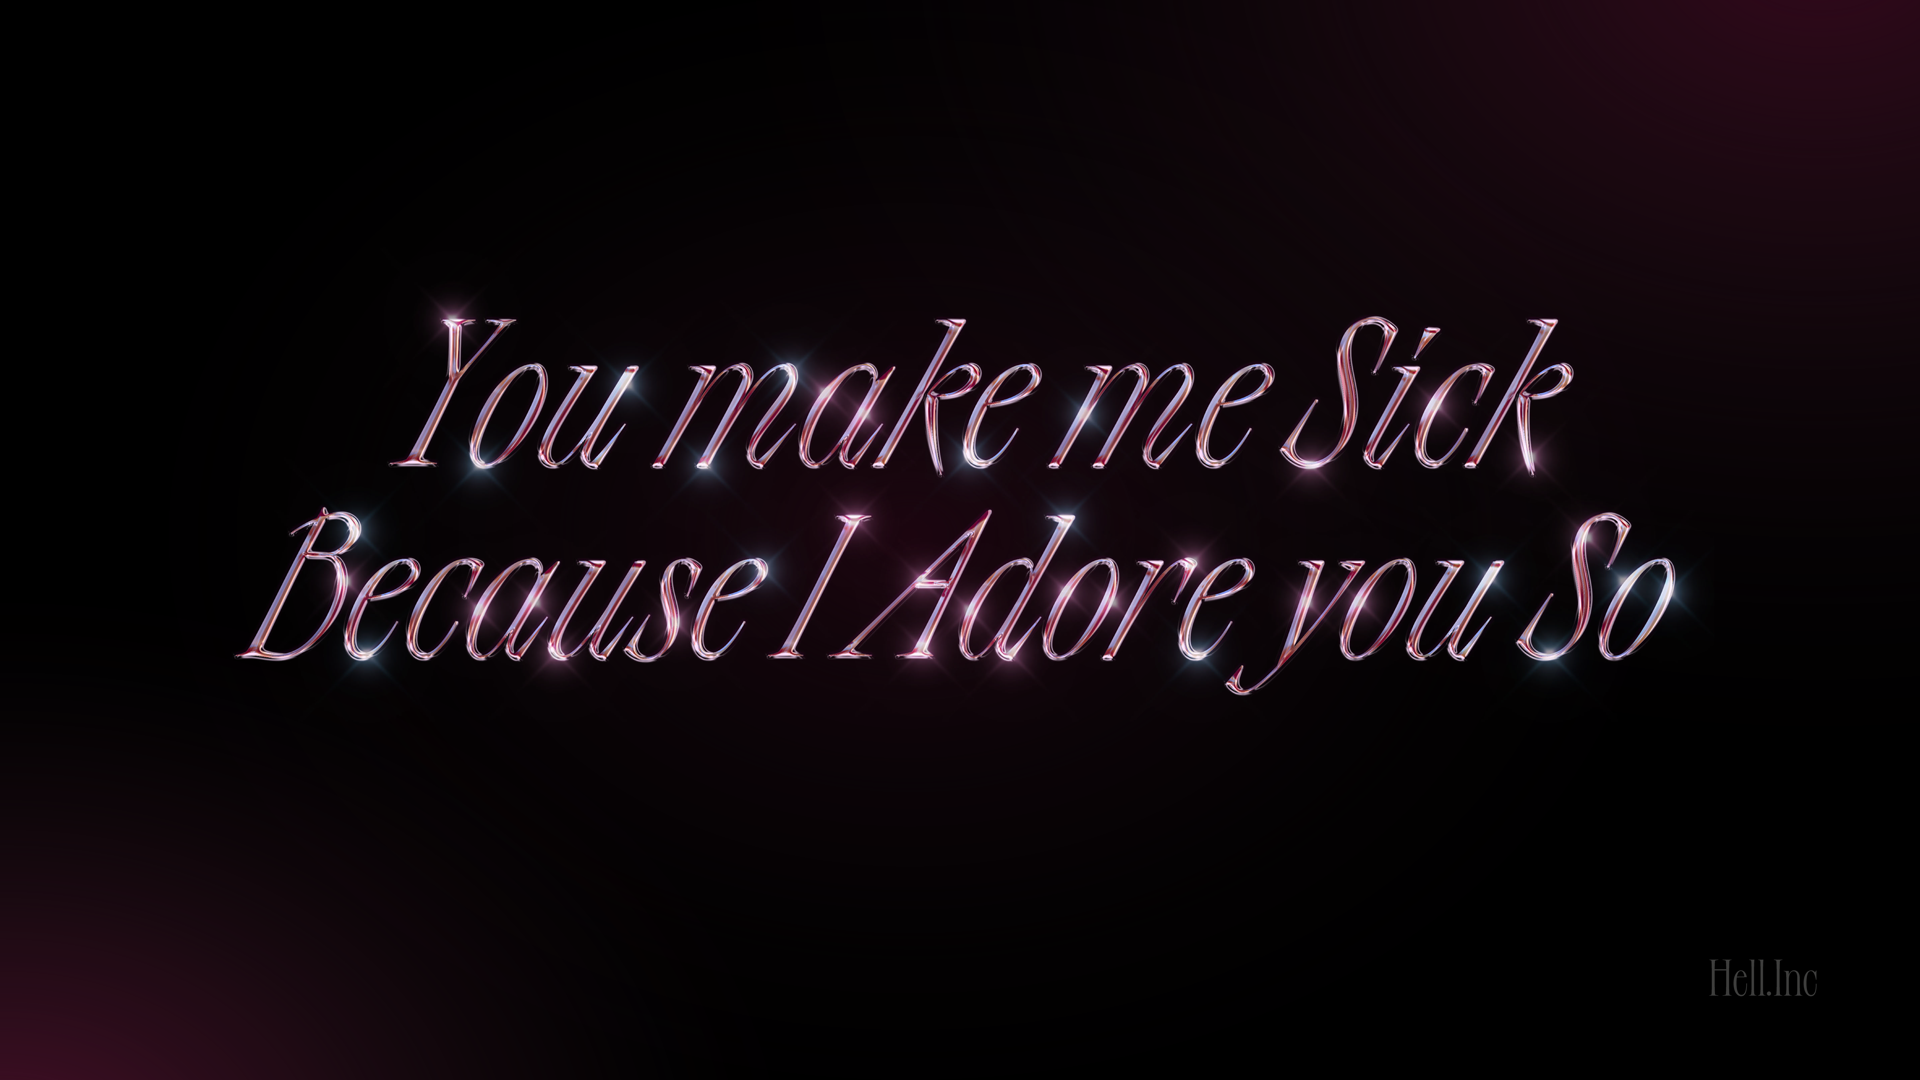 A very nice image of the phrase: You make me sick Because I Adore you So.